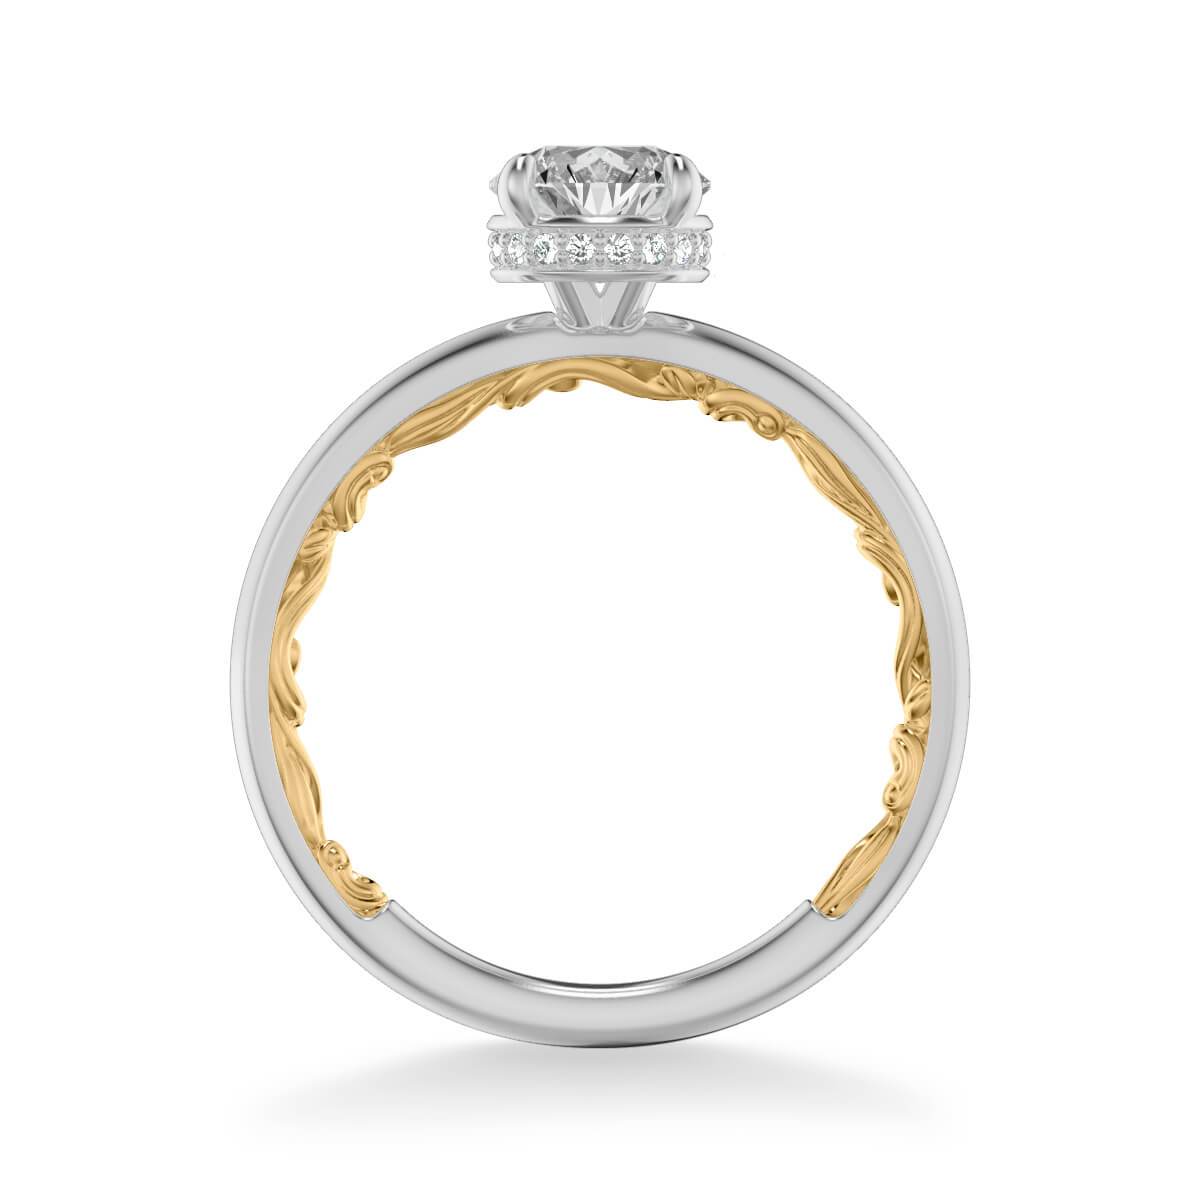 Aileen Lyric Collection Classic Solitaire Diamond Engagement Ring